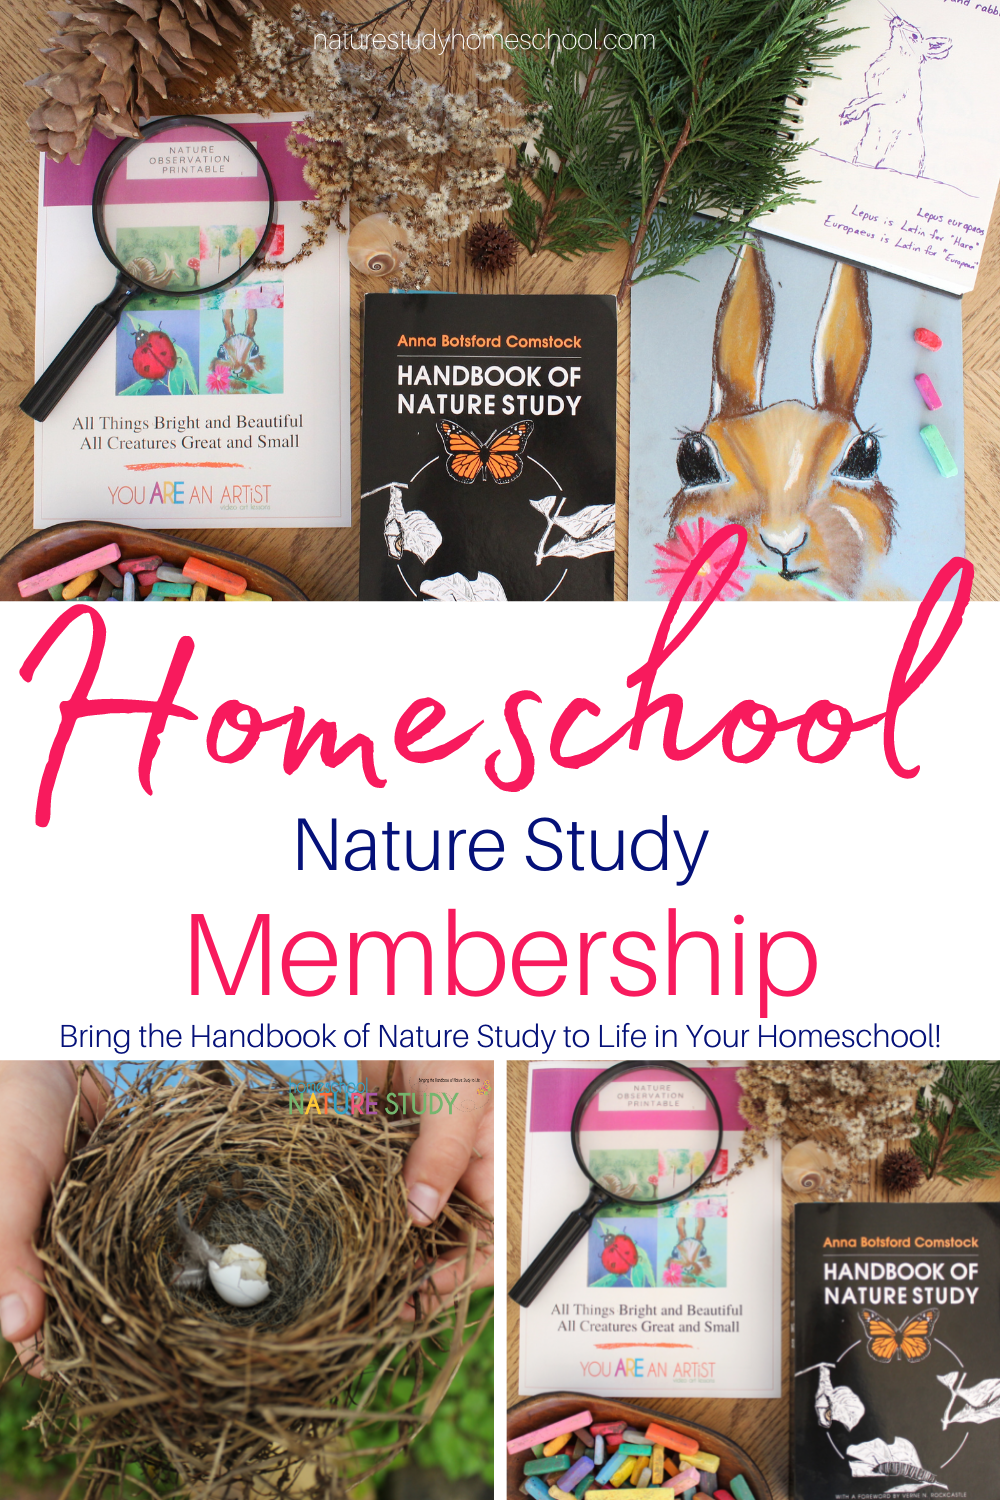 Bring the Handbook of Nature Study To Life In Your Homeschool!